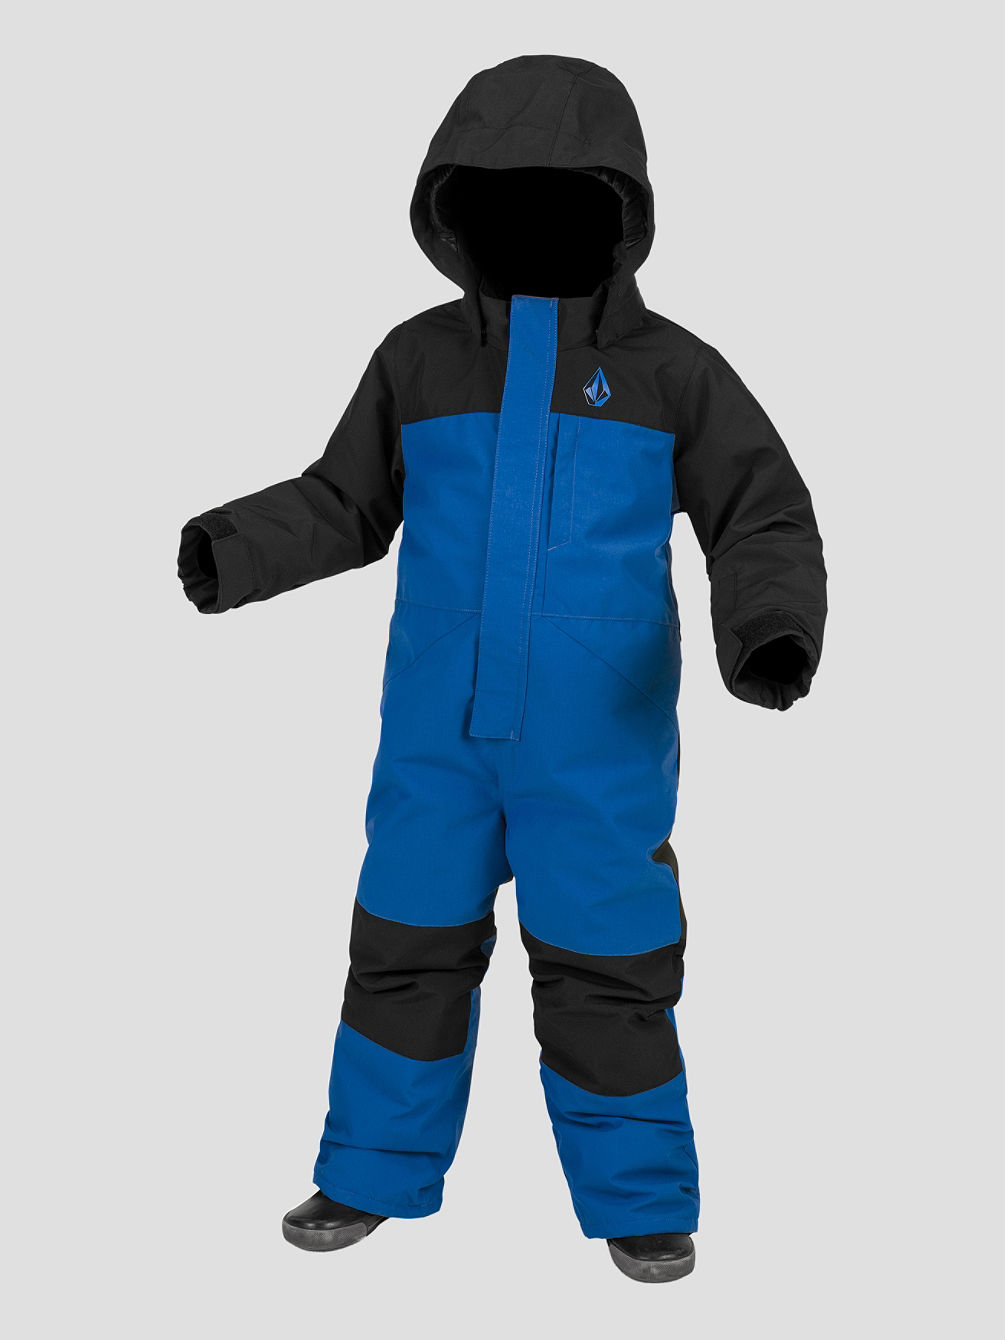 Toddler One Piece Overal